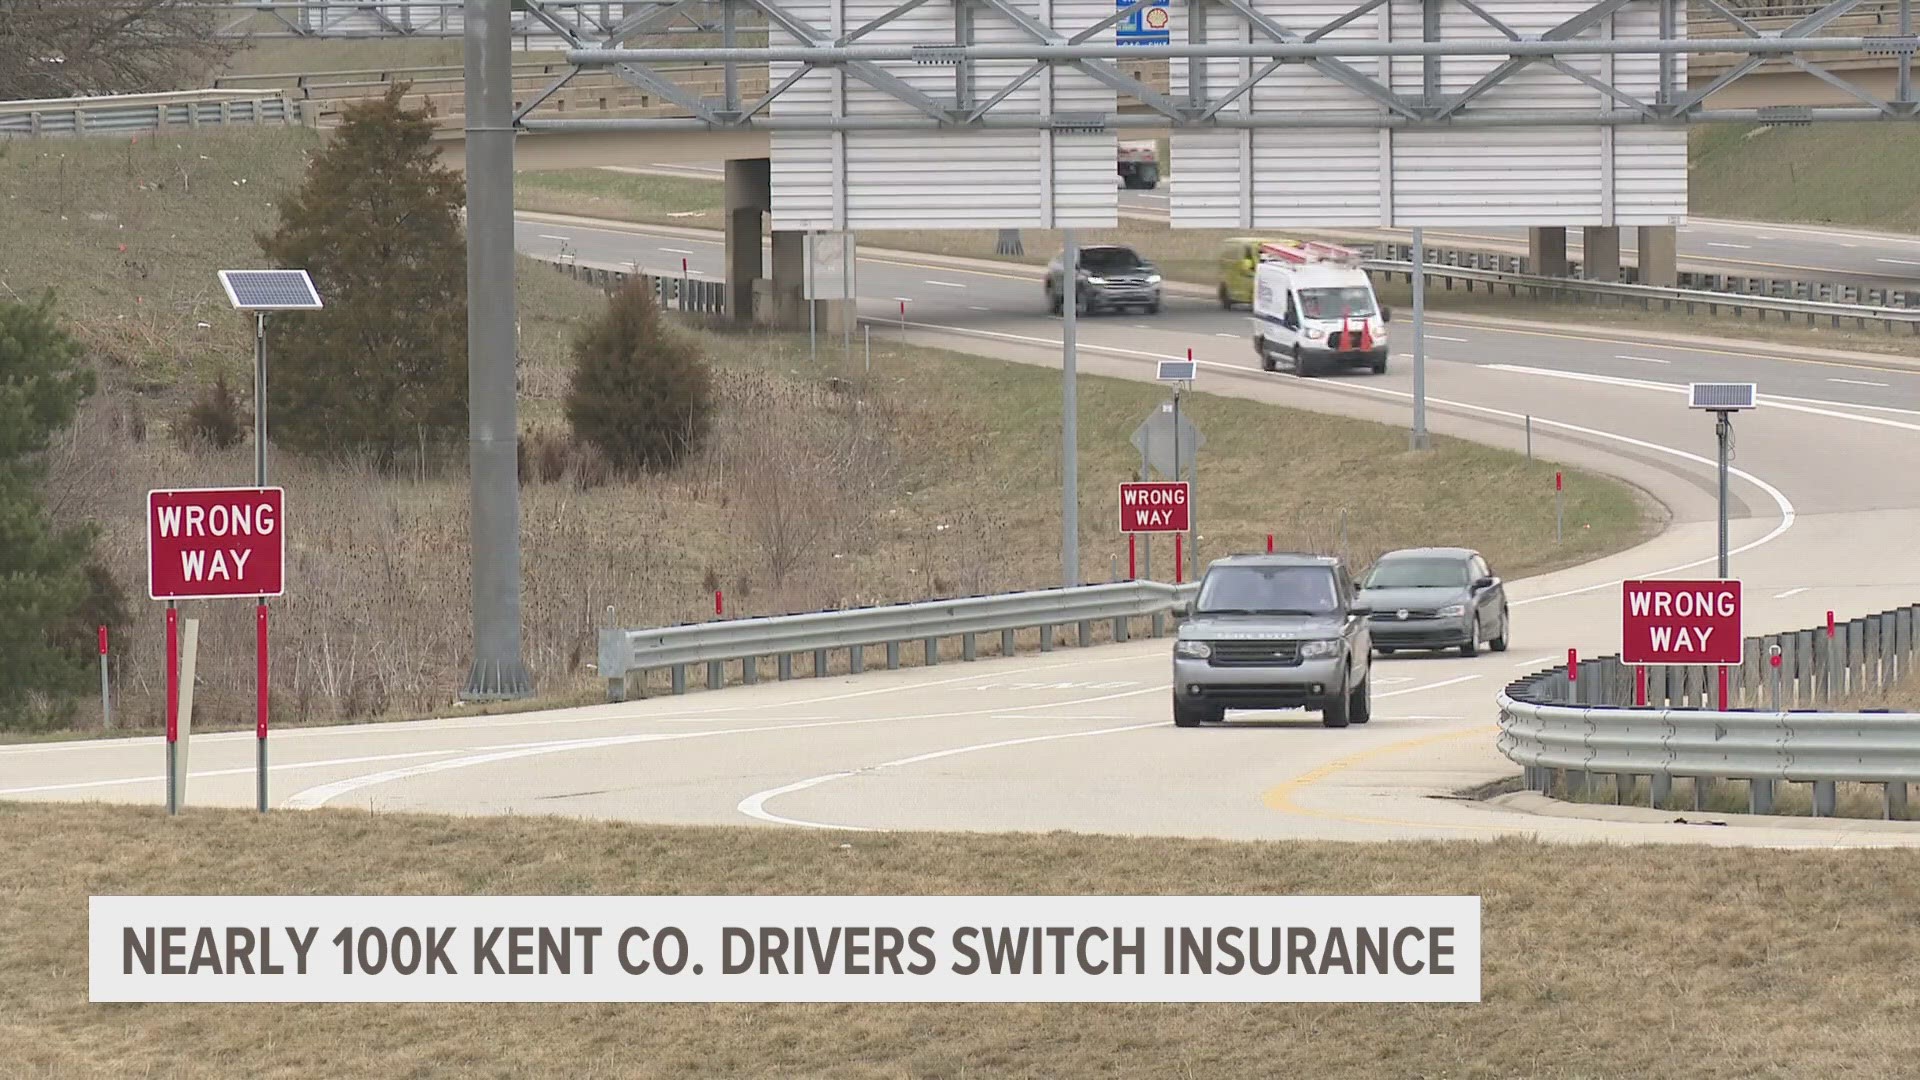 The statistic, released by the Insurance Alliance of Michigan, shows that about 18% of all Kent County drivers who have switched PIP coverage levels.